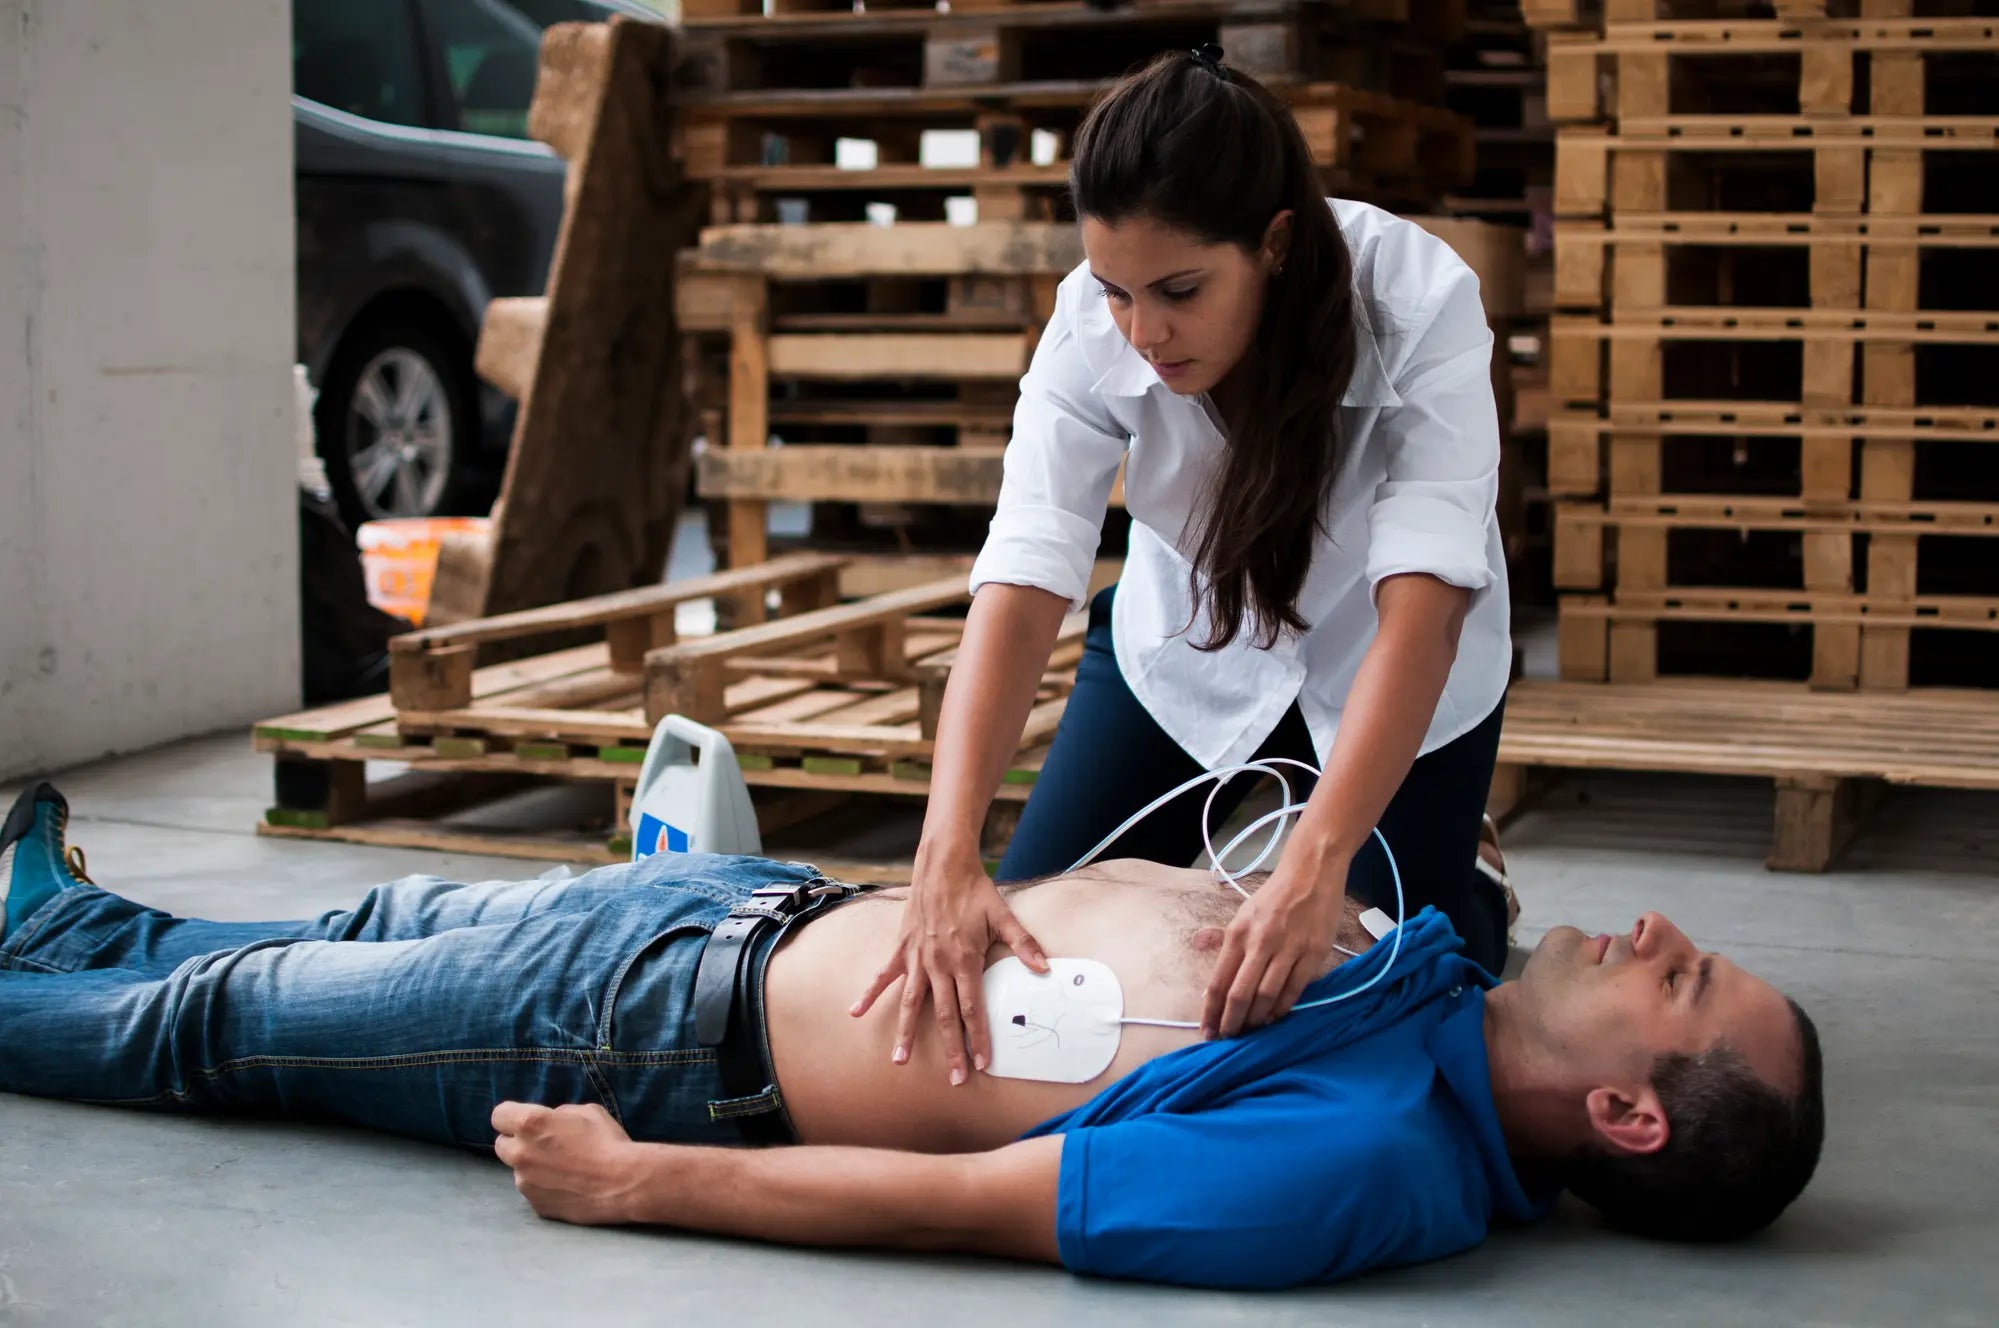 A woman applying electrode pads to a man who has fallen victim to sudden cardiac arrest